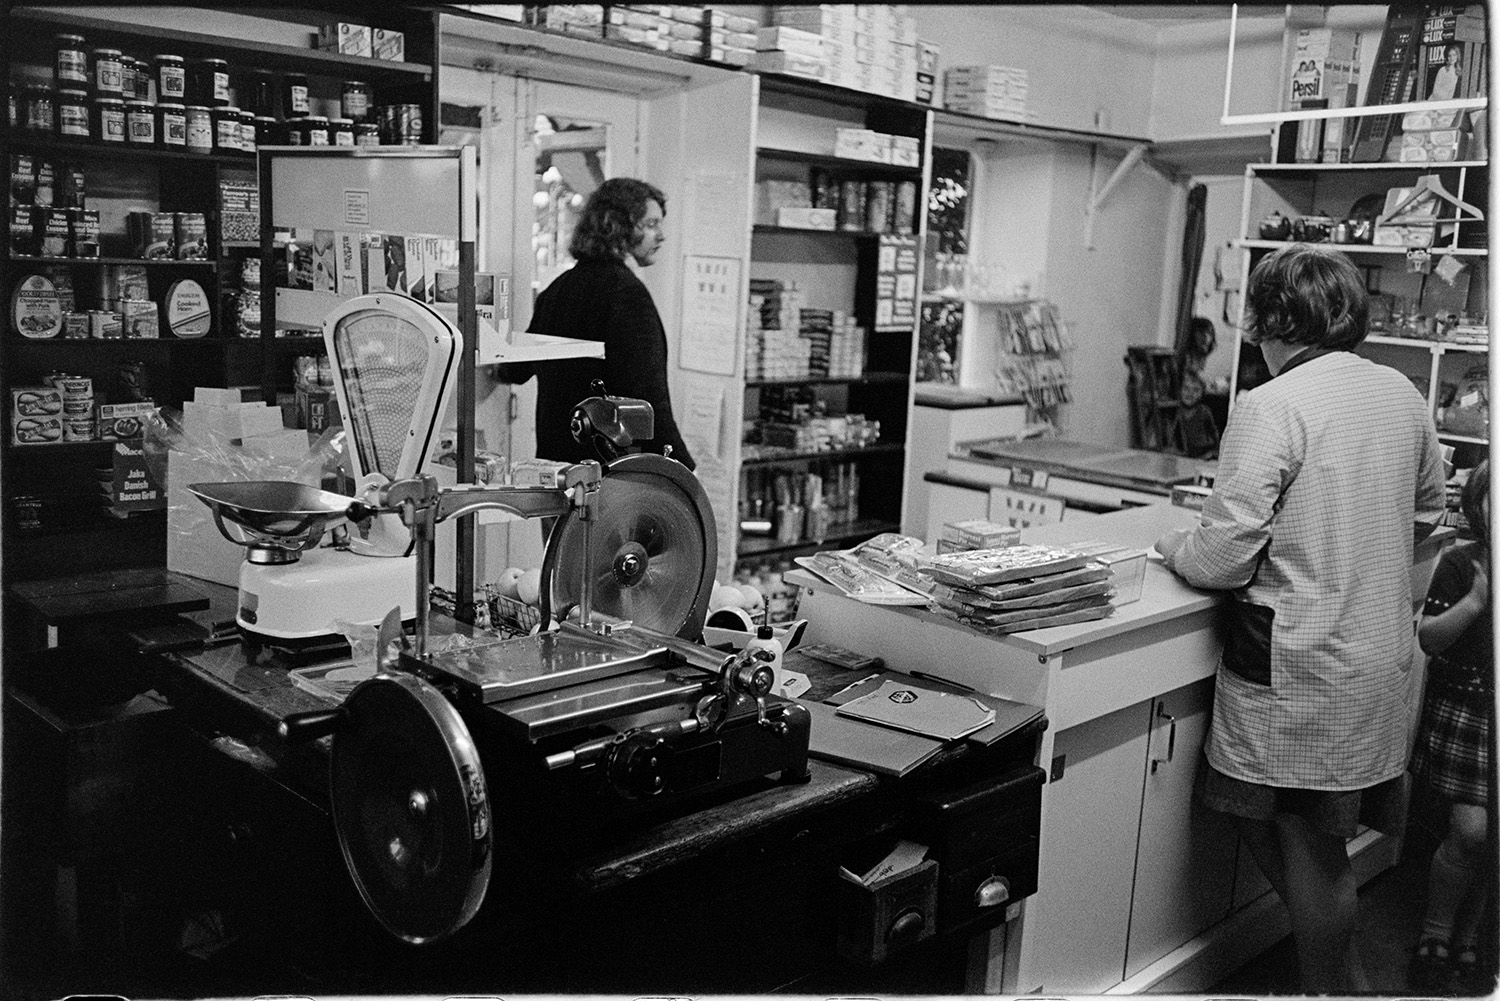 Interior of village shop with woman serving customers, goods on shelves, bacon slicer. 
[Christine Keogh, proprietor of Merton Stores, serving a customer in the shop. Jars and tins of food can be seen on the shop shelves and a bacon slicer and set of scales is on the counter.]